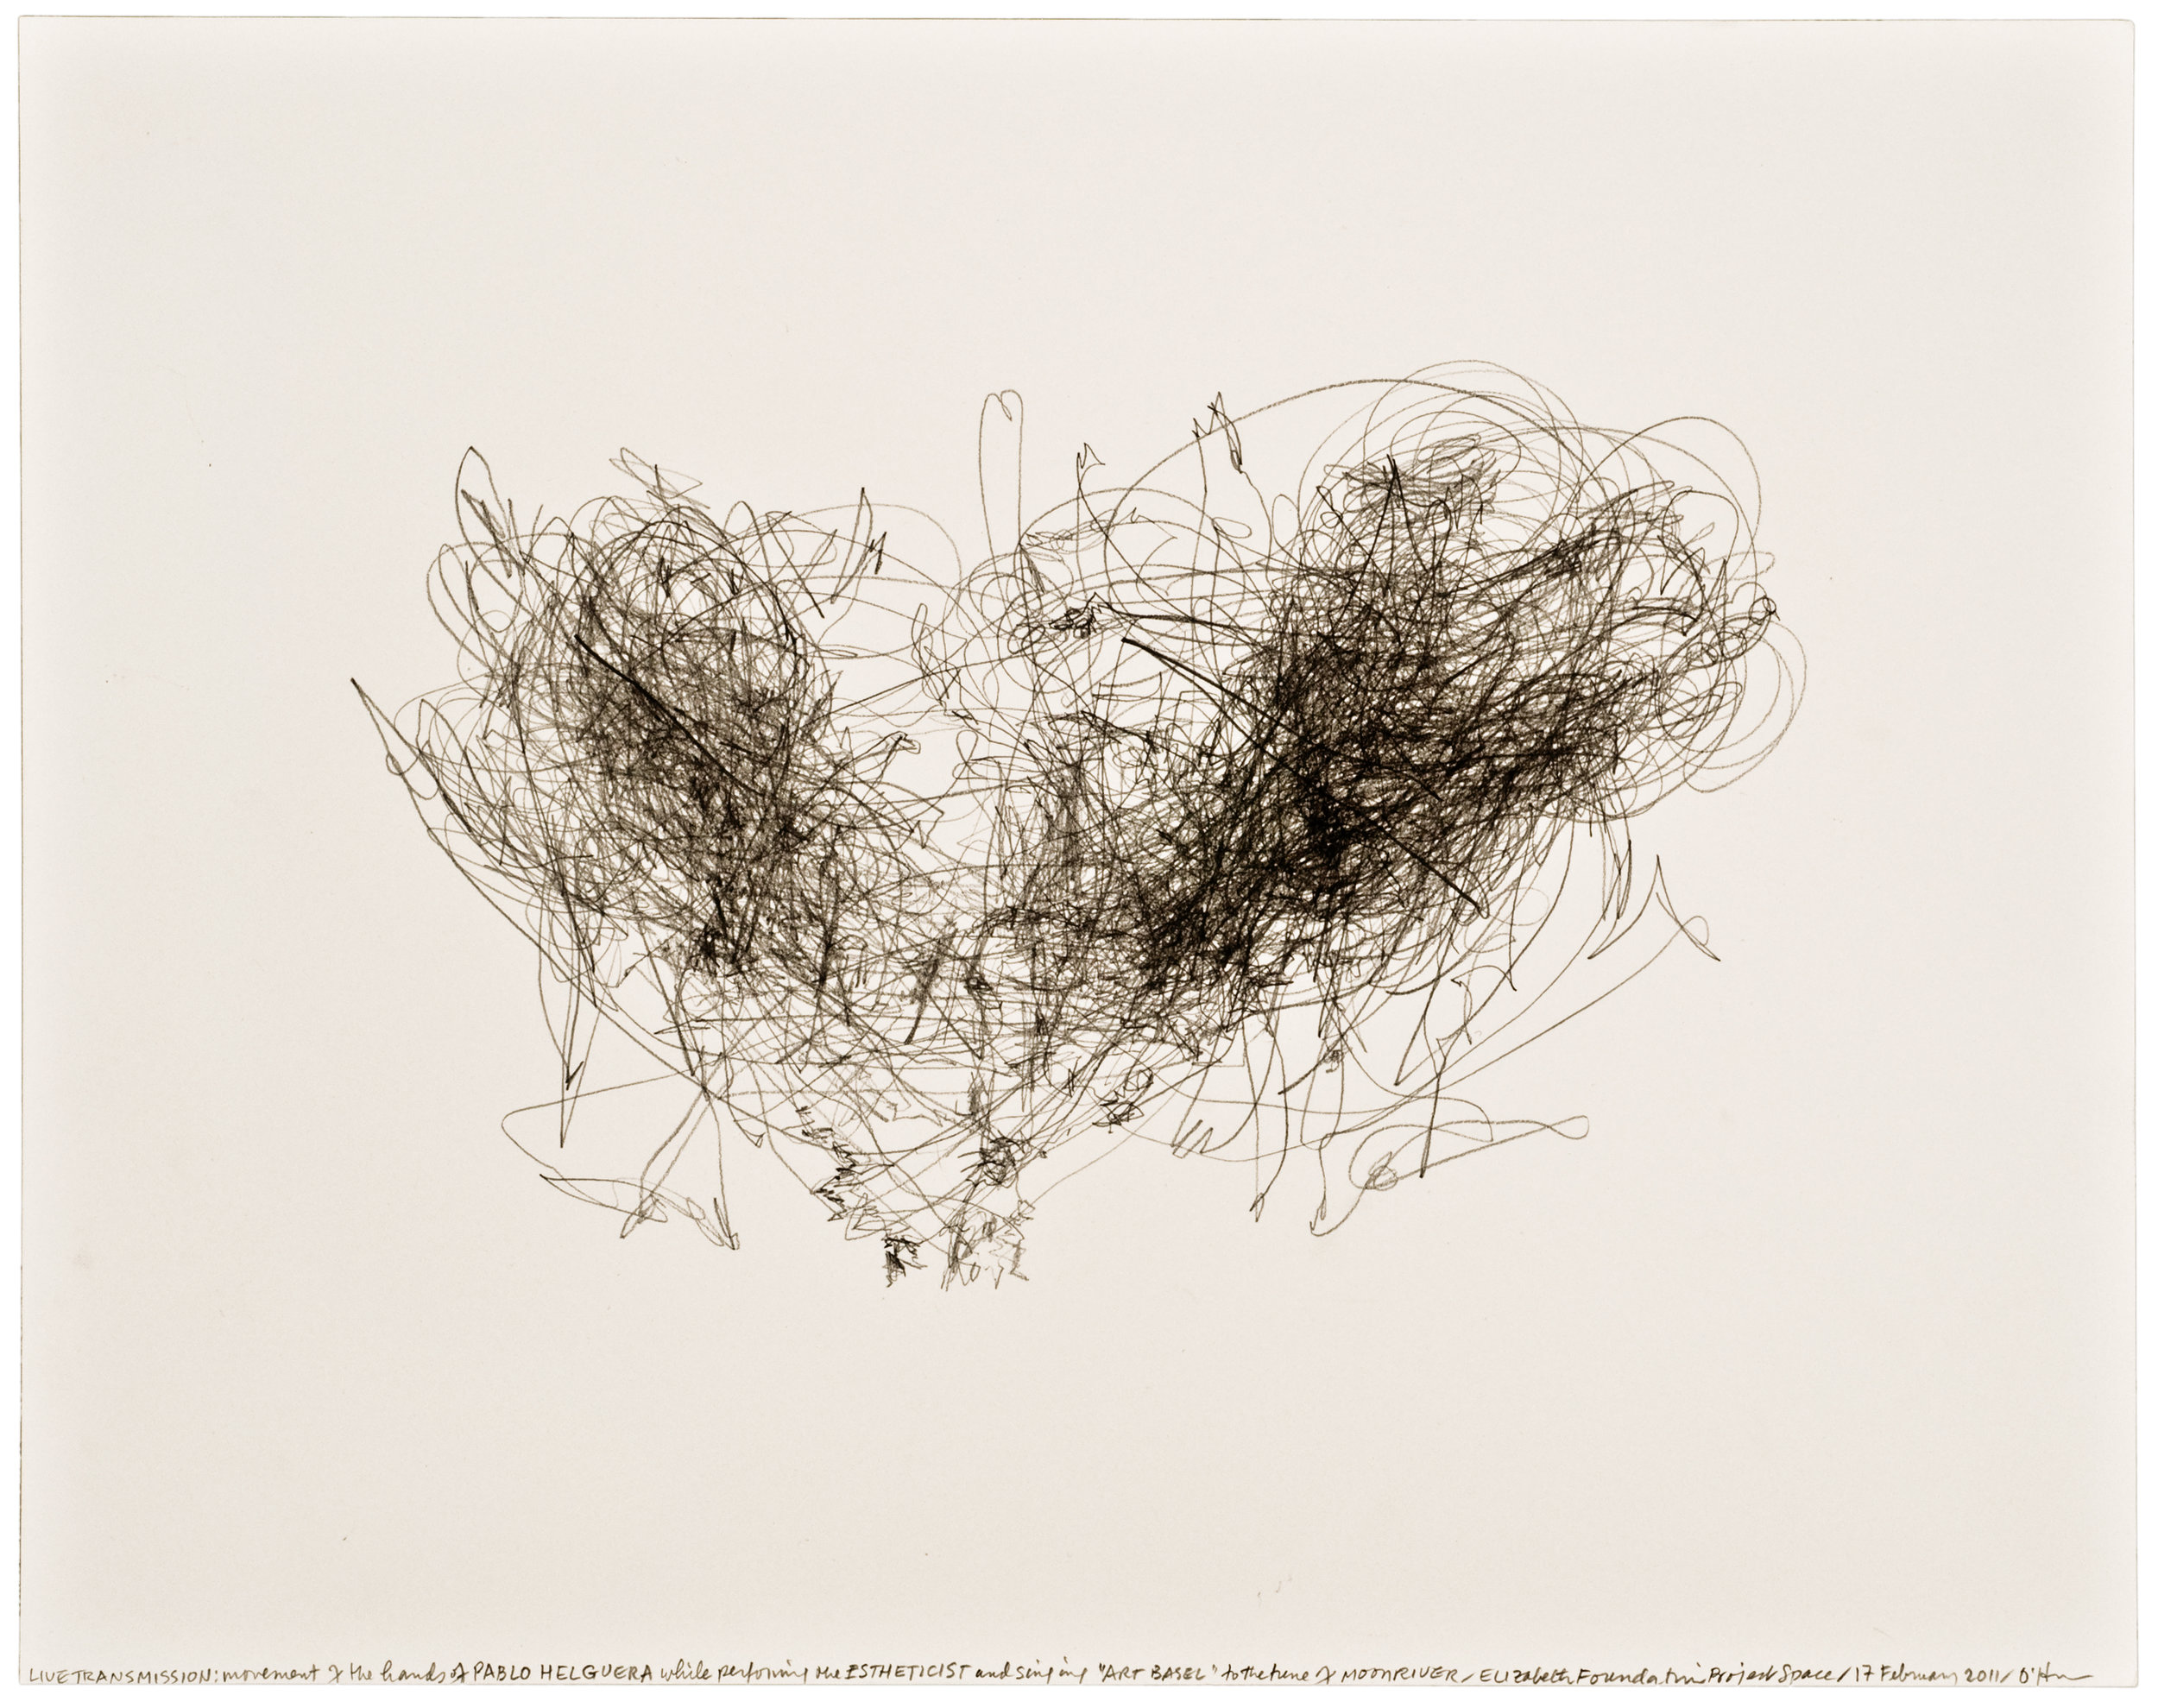  Morgan O’Hara,  LIVE TRANSMISSION: movement of the hands of PABLO HELGUERA while performing The Estheticist and singing Art Basel to the tune of Moonriver / Elizabeth Foundation for the Arts Project Space / 17 February 2011,  11 x 14 in., Graphite o